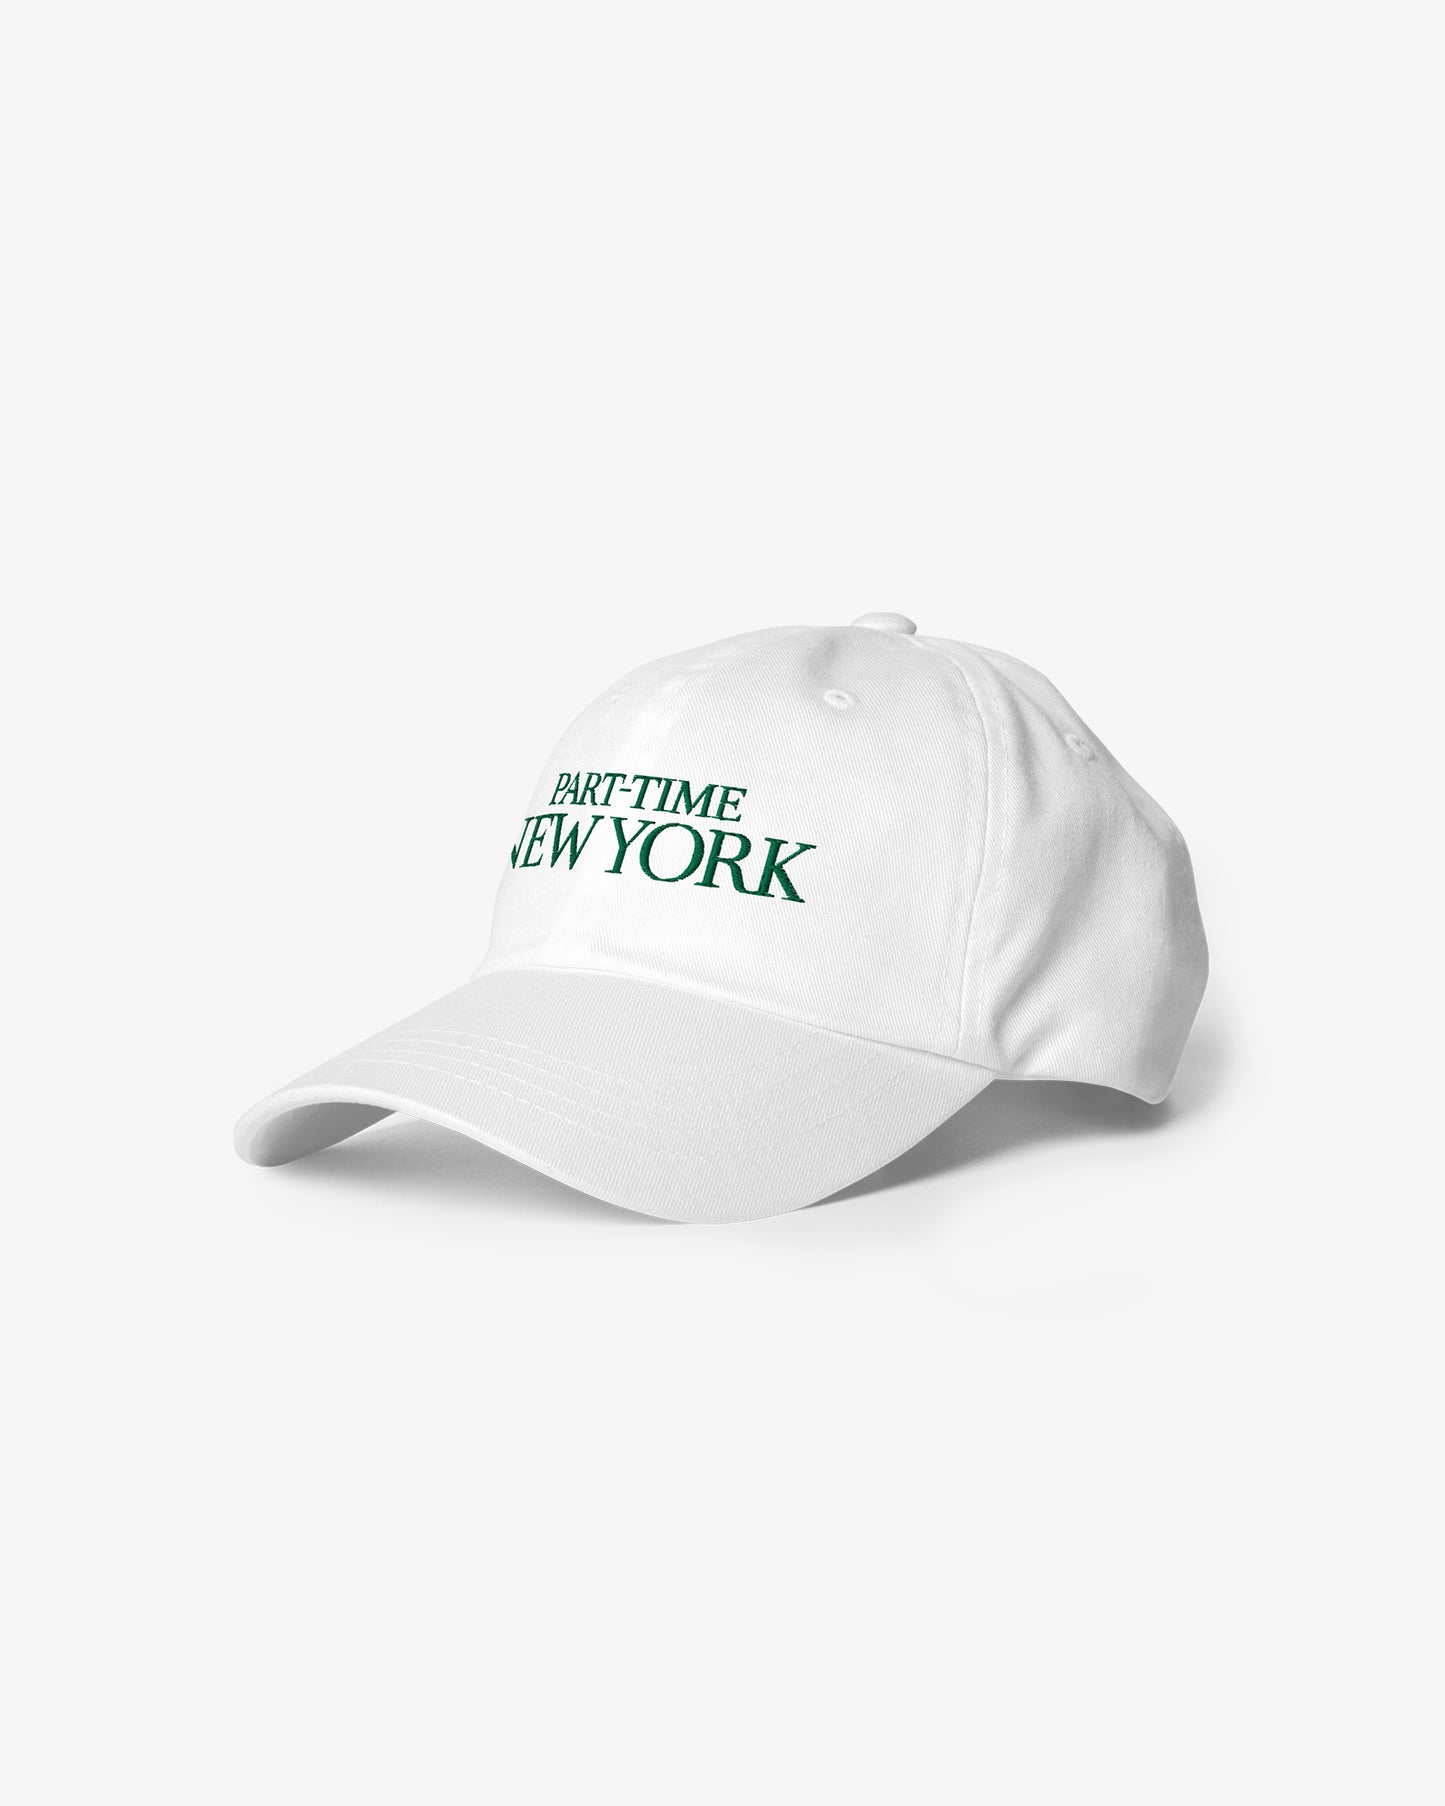 PART-TIME NEW YORK Dad Cap - White/Green